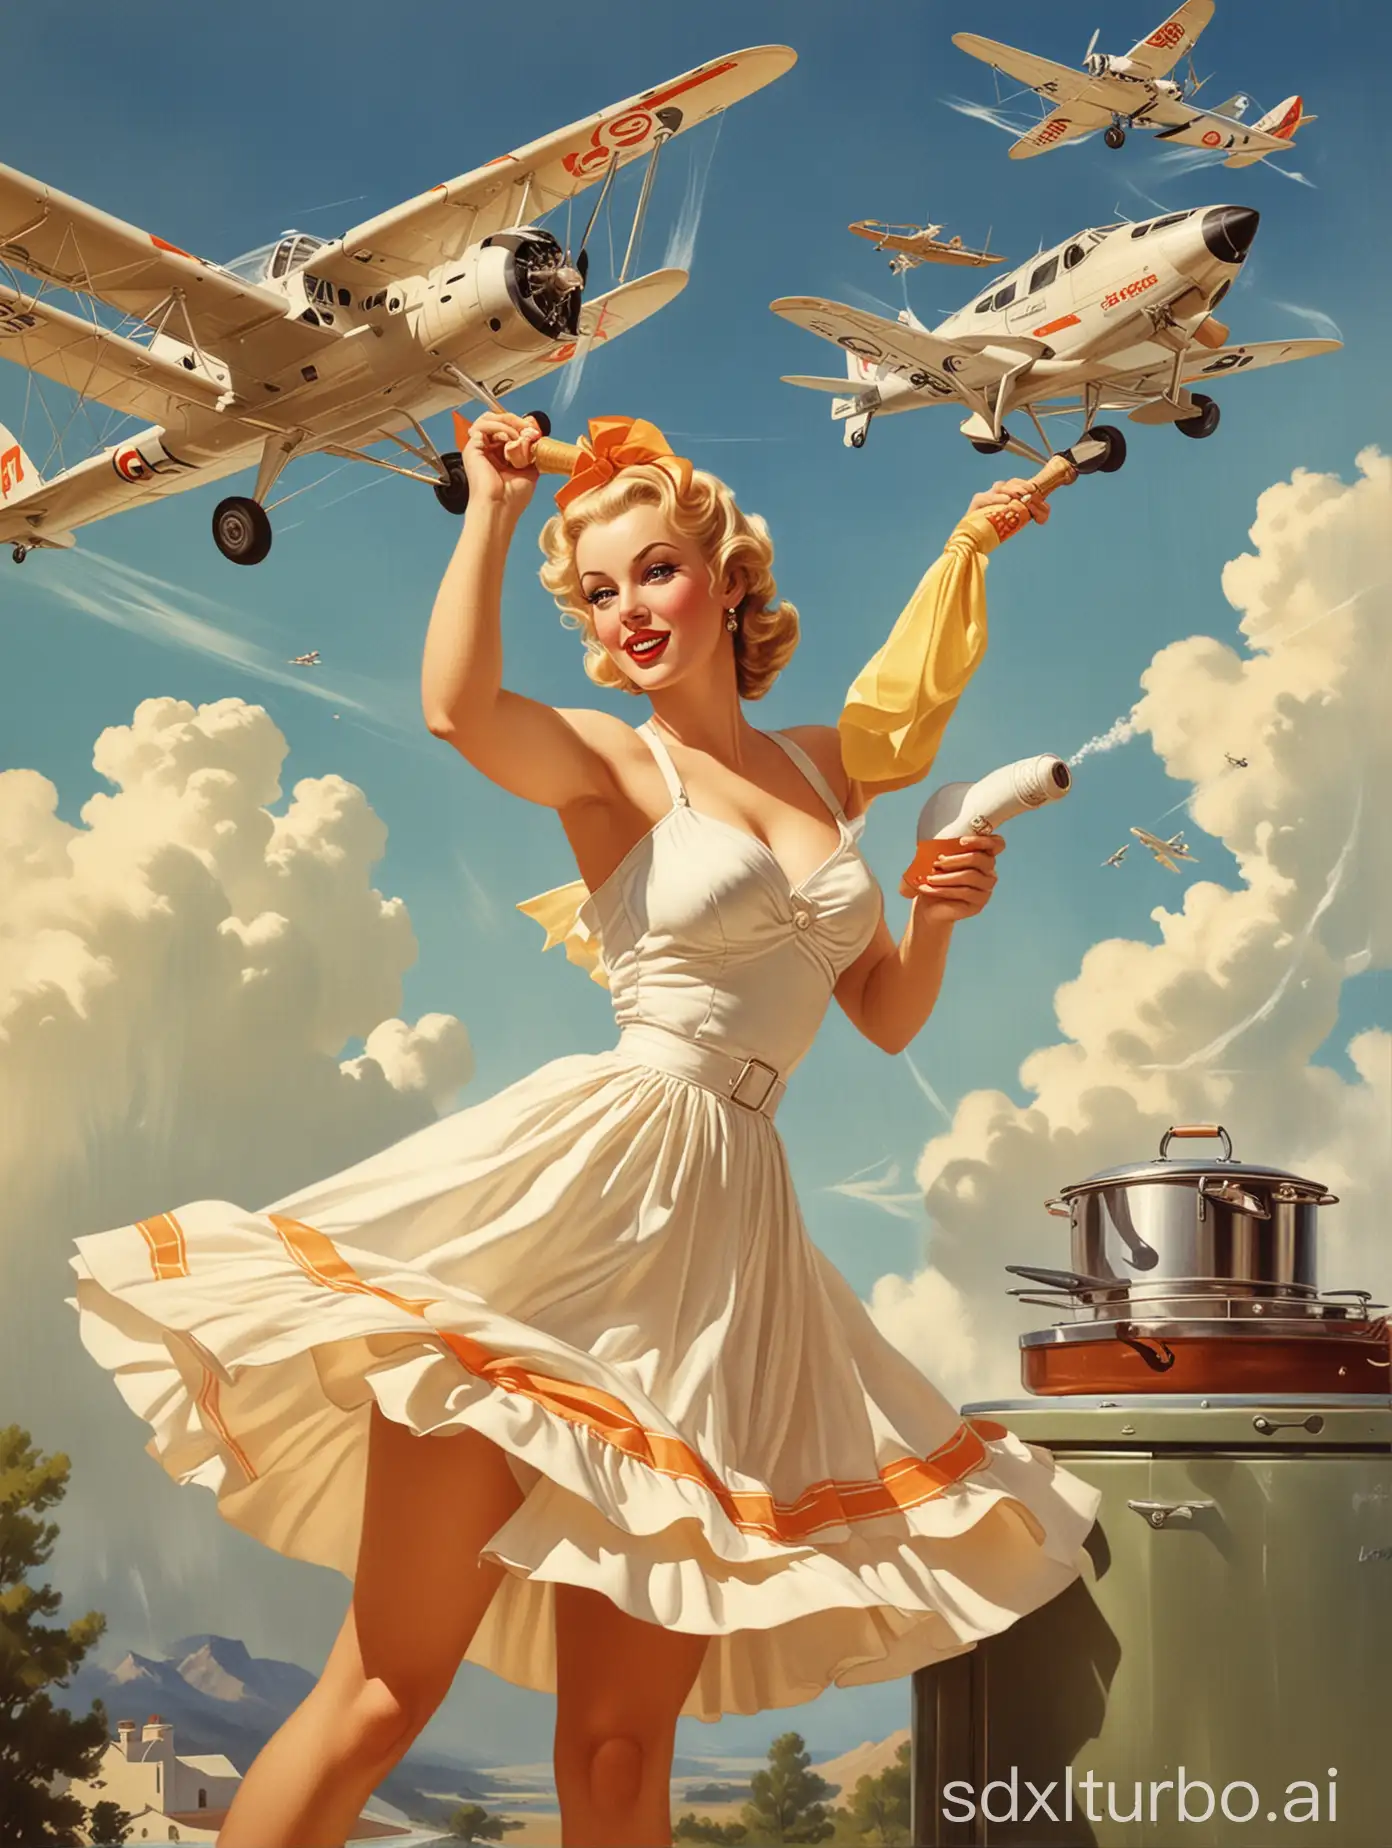 a painting of a woman holding a tennis racquet, glossy old advertising poster, honey wind, steaming food on the stove, flitting around in the sky, pinup style, still image from the movie, pleated skirt, dust swirling, weather report, holding a bell, blonde women, pot, speedy aircraft, 3 0 s
vintage clothing poster, william goddard poster, gil elvgren style, promotional poster, beer advertisement, by Alberto Vargas, hints of coles phillips, theatrical poster, by Gil Elvgren, pin up style poster, vintage magazine illustration, elvgren, inspired by Gil Elvgren, inspired by Coles Phillips